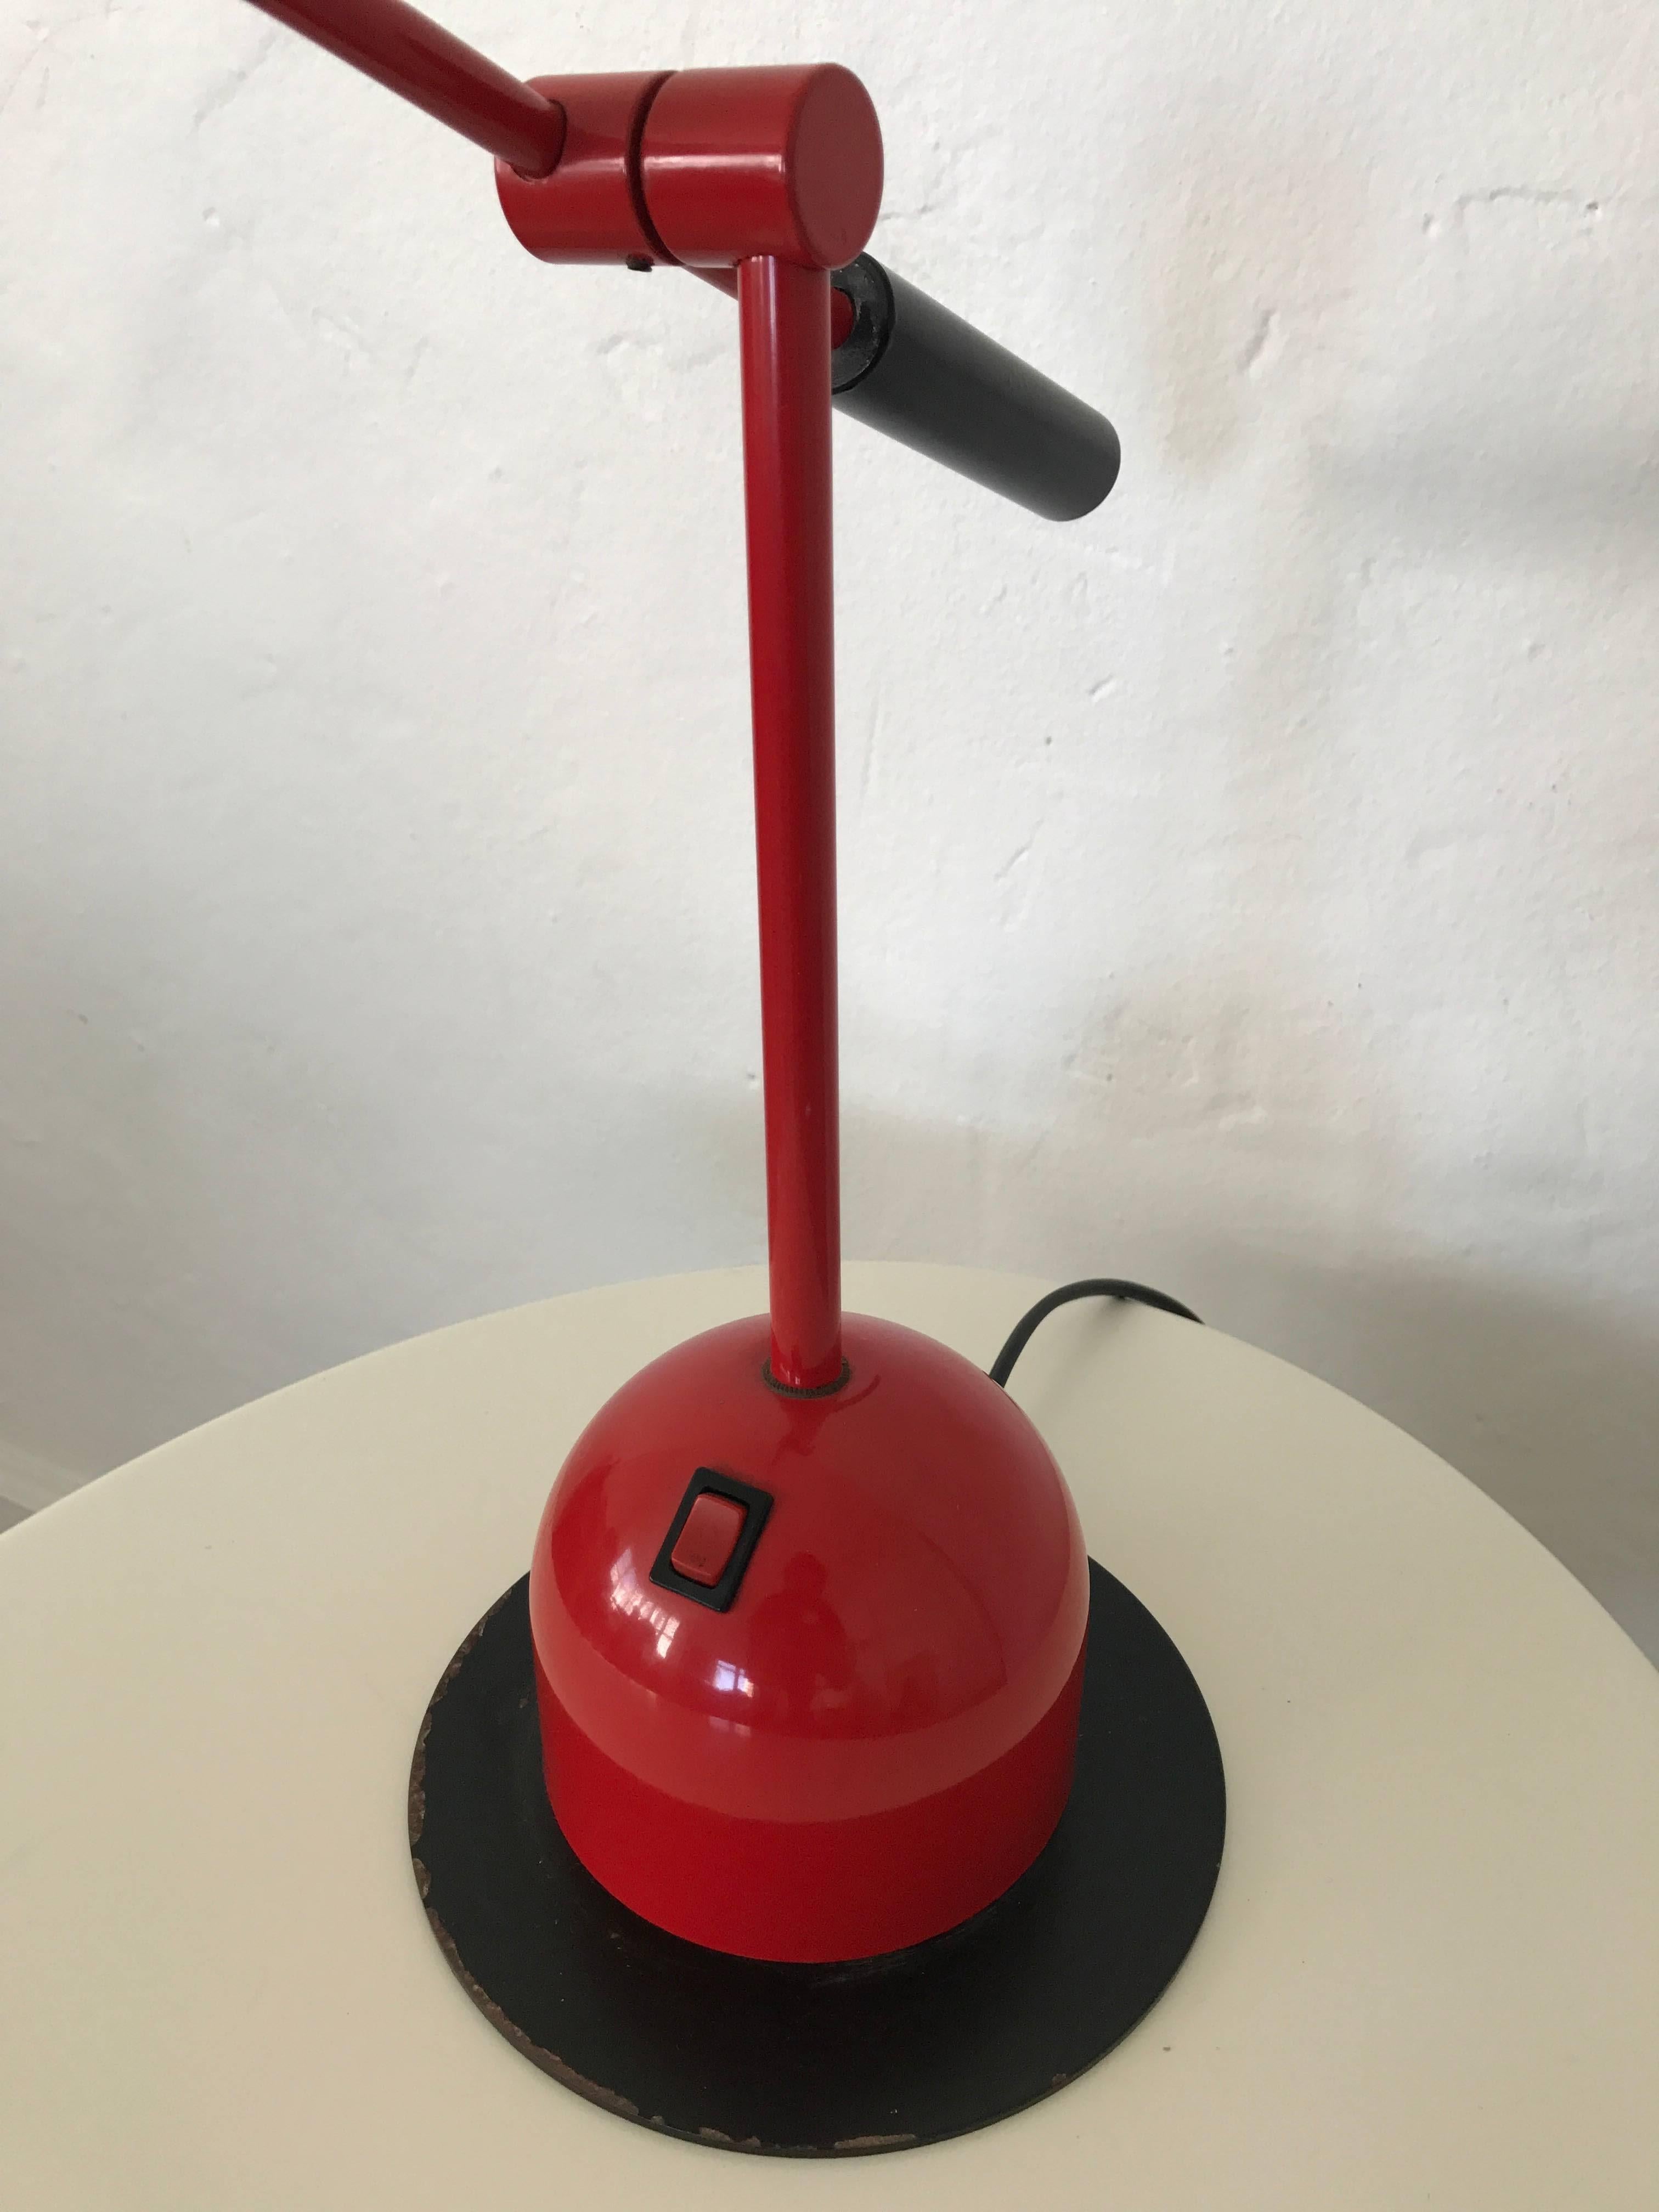 Post Modern Red Adjustable Desk Task or Table Lamp by Gammlux Italy, circa 1980s In Good Condition For Sale In Miami, FL